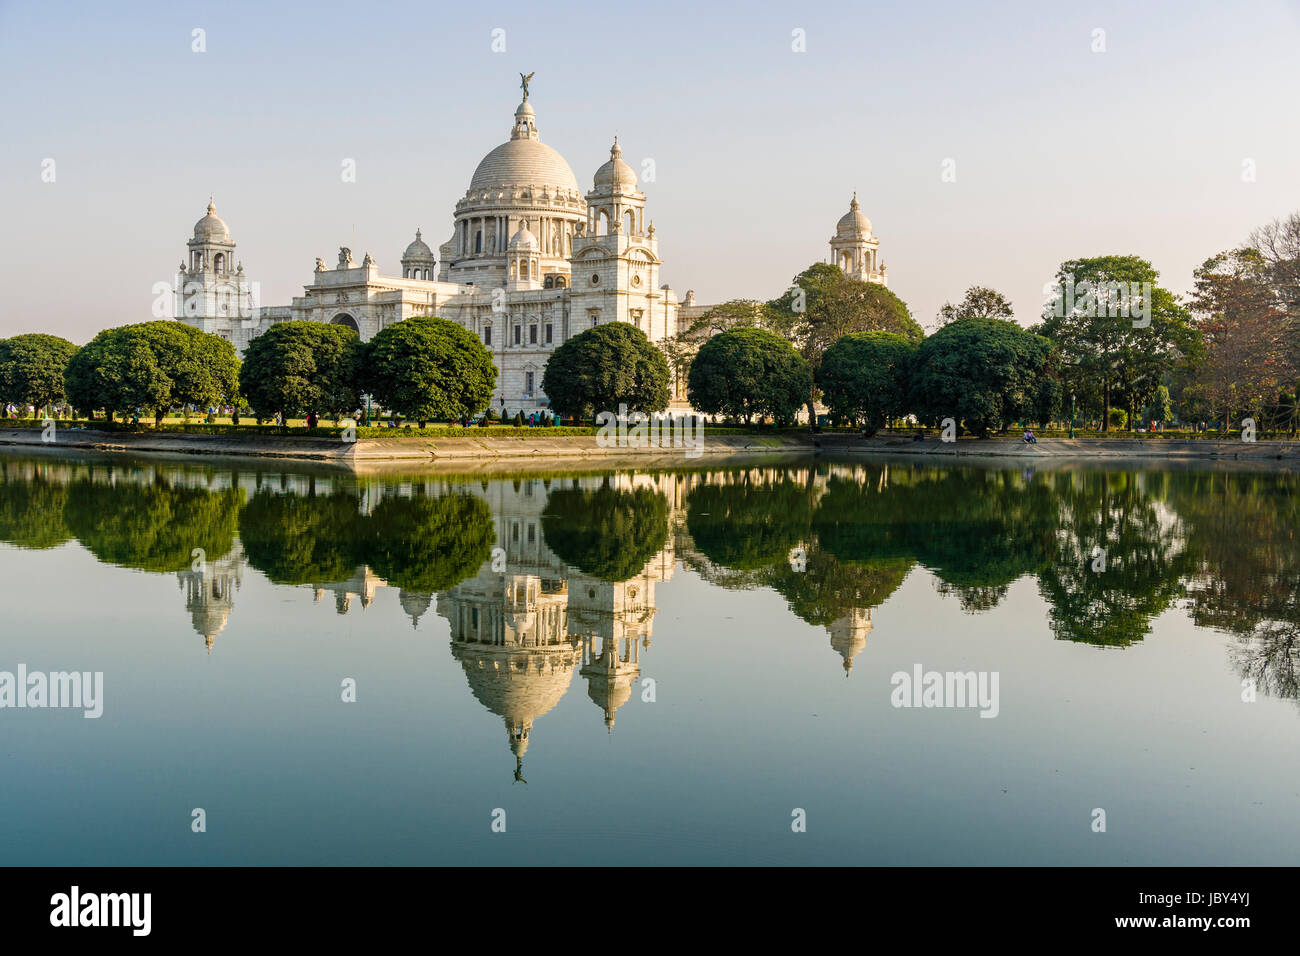 The Victoria Memorial, established in 1922, mirroring in a water pool Stock Photo